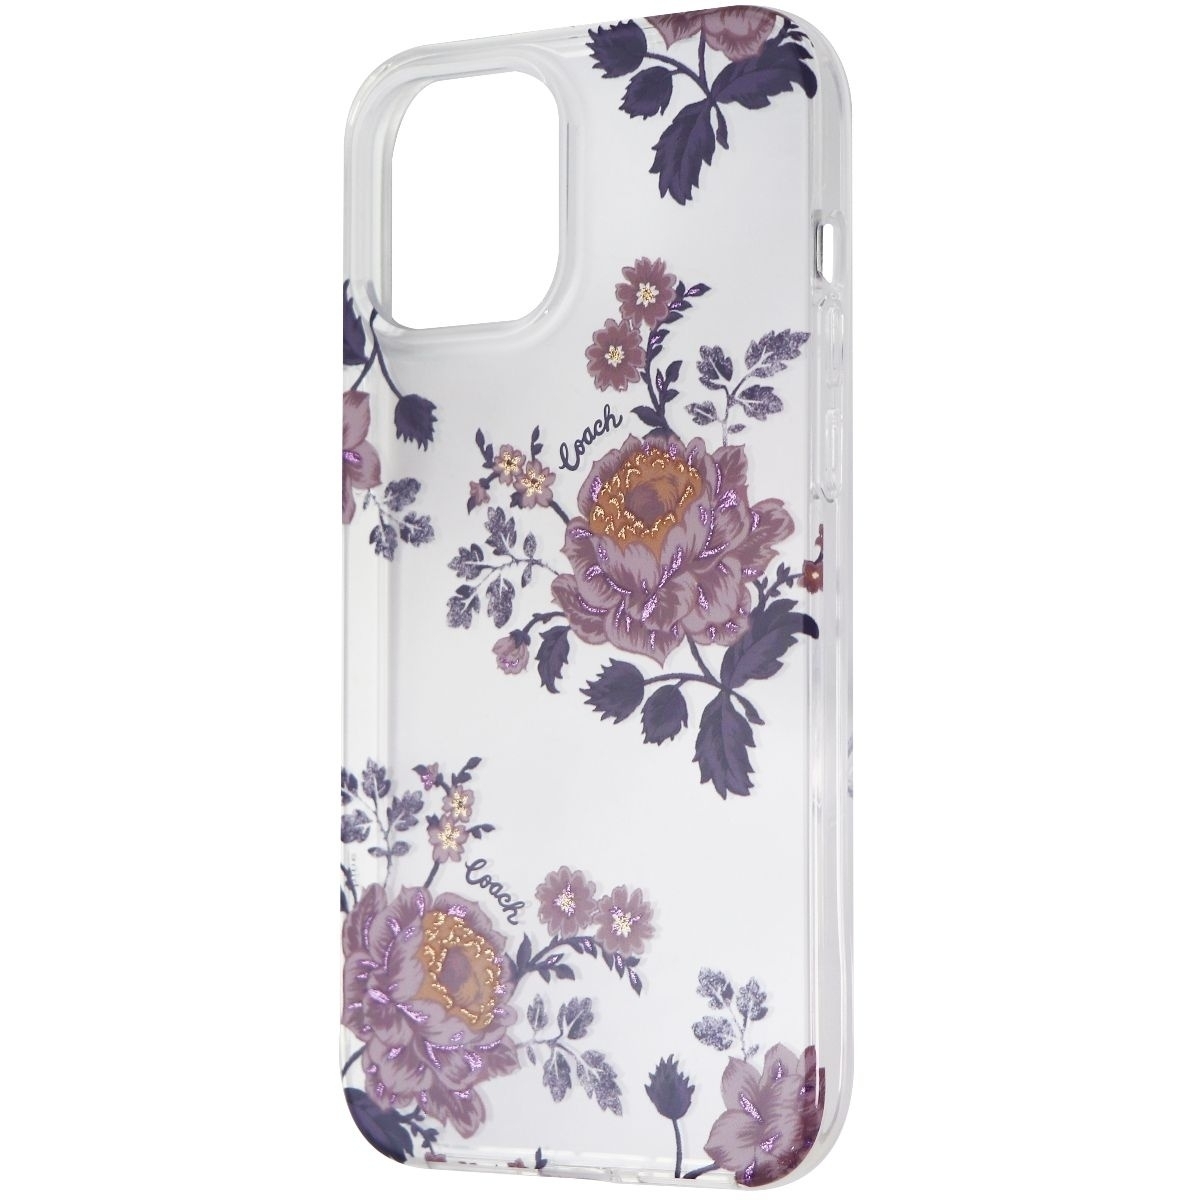 Coach Protective Case For Apple IPhone 12 Pro Max - Moody Floral Clear